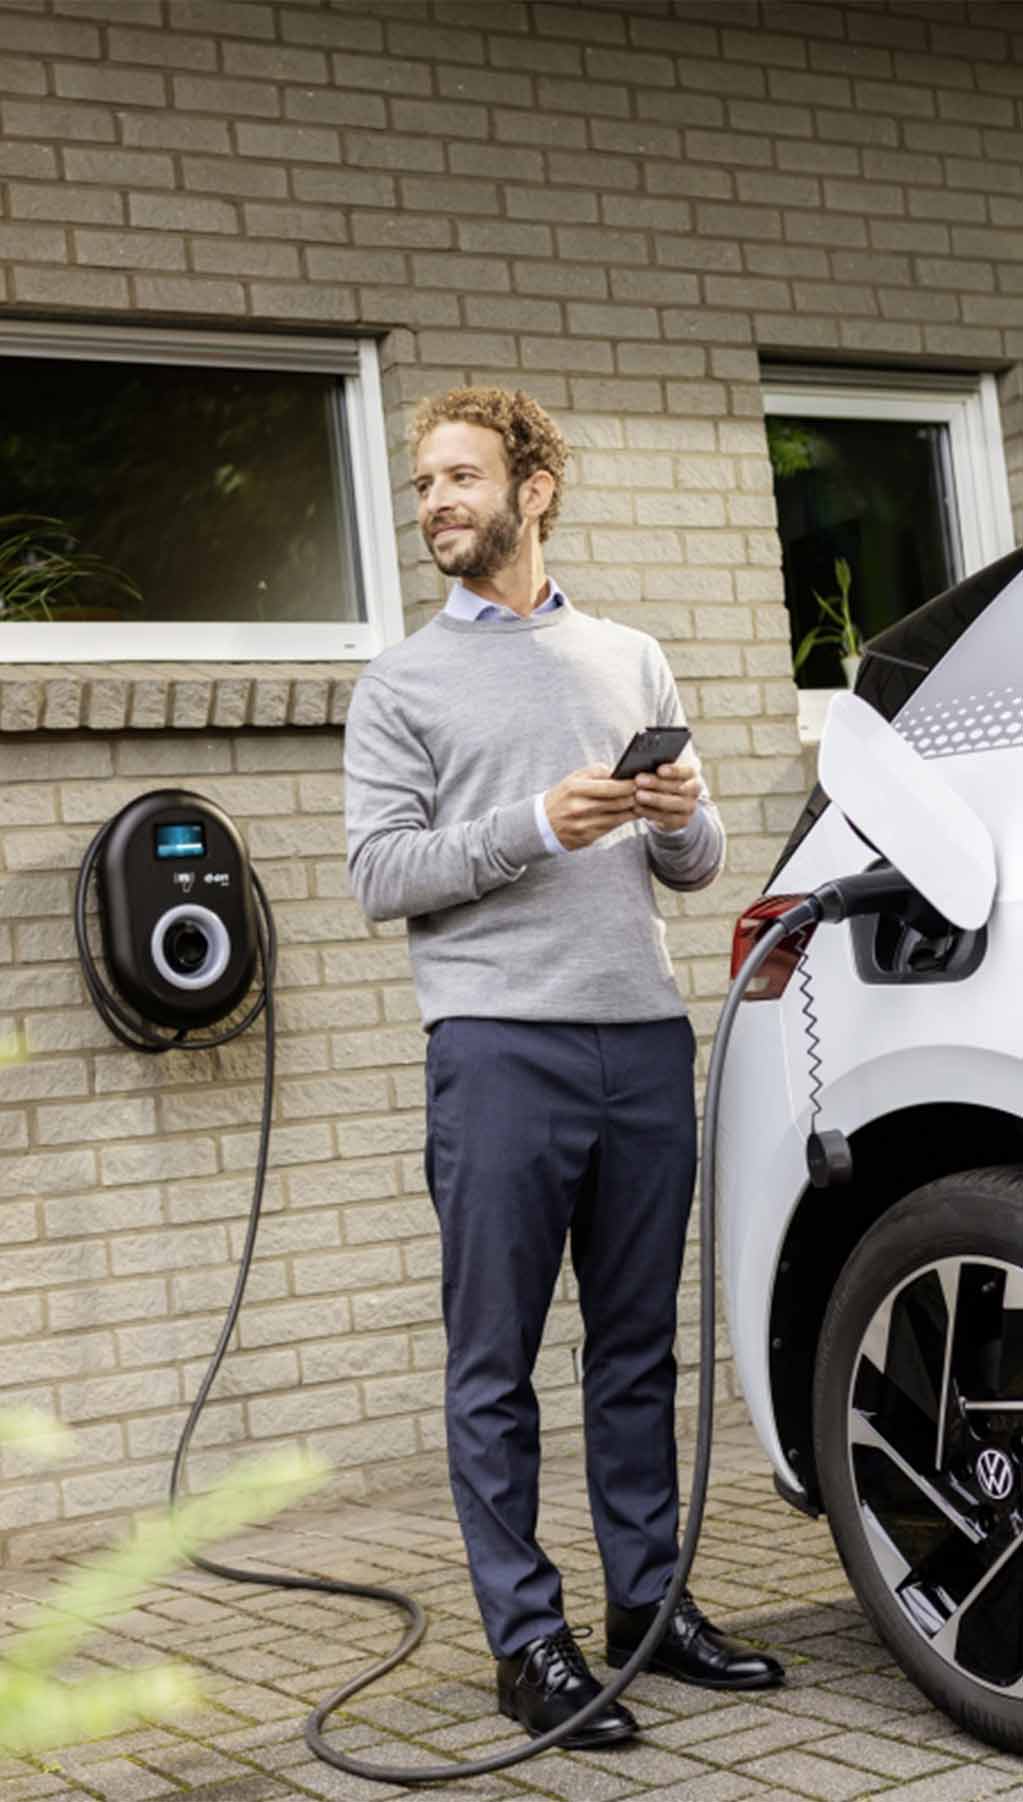 The Basics of Plugging In an EV